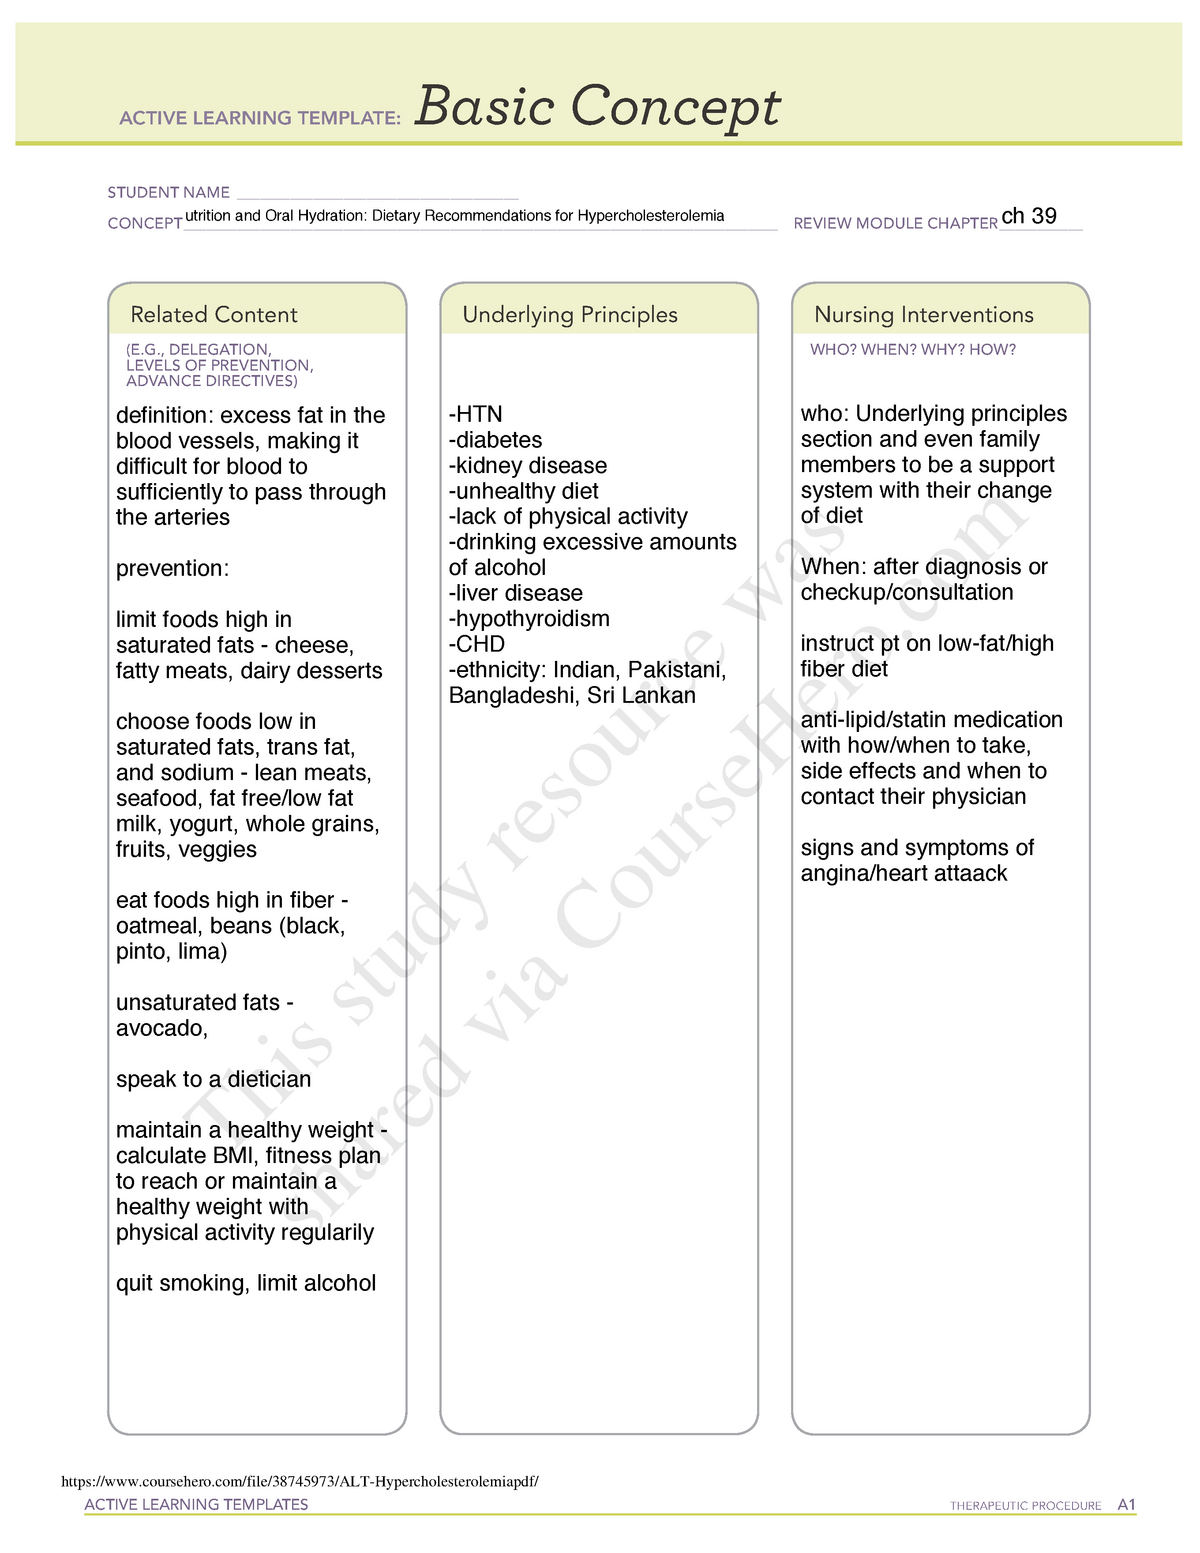 Nutrition And Oral Hydration Ati Template